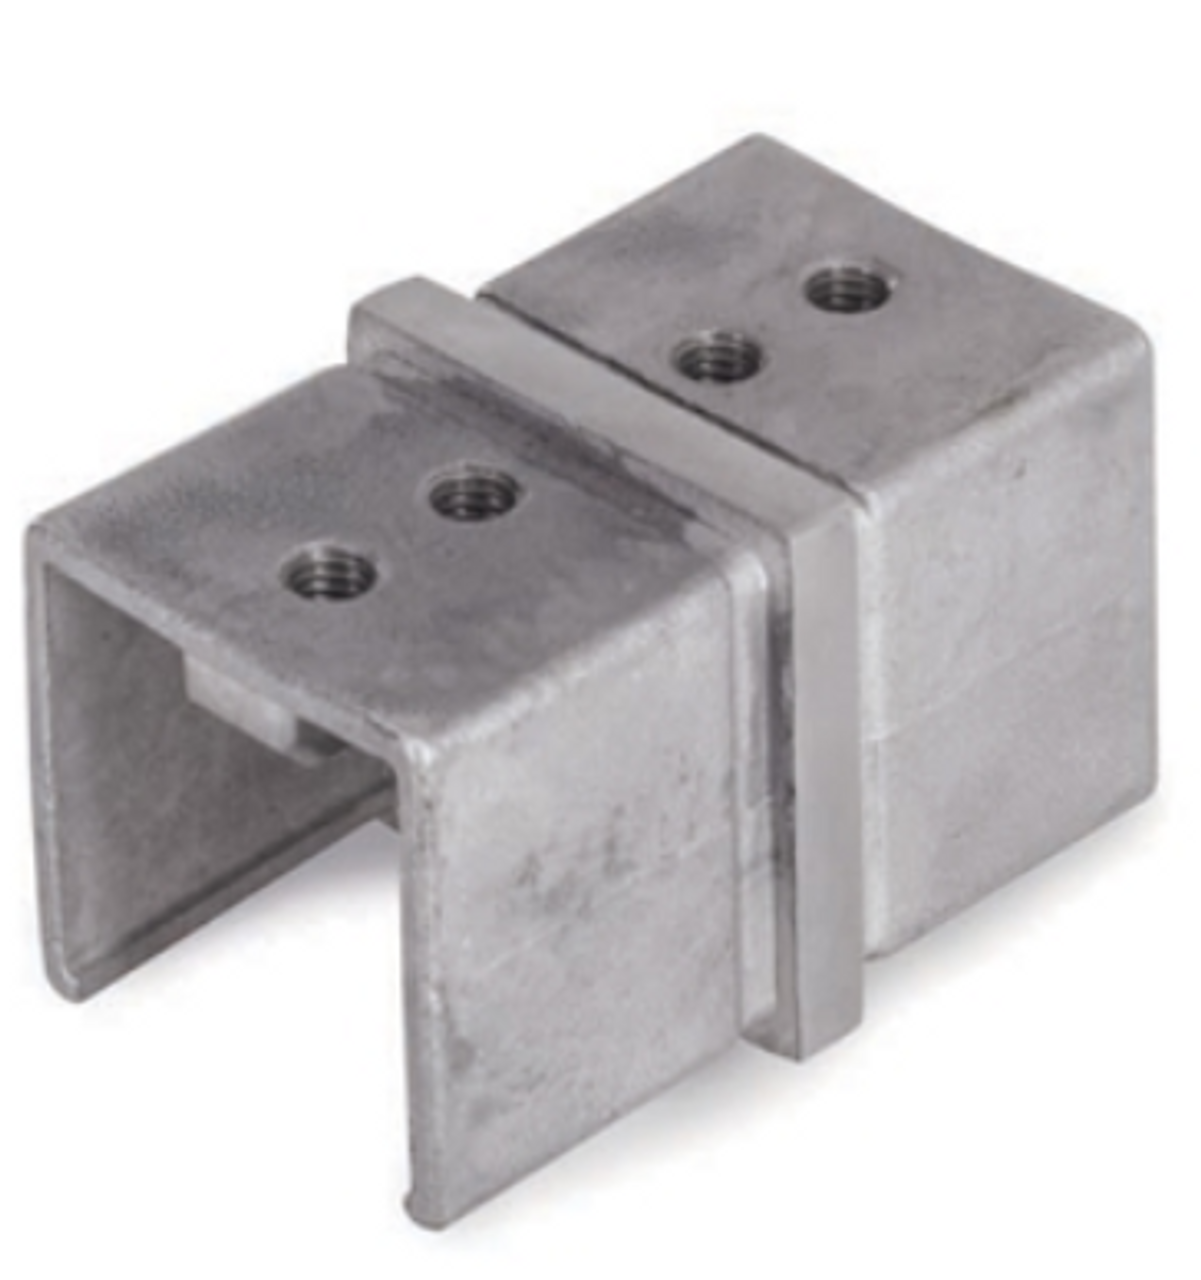 Stainless Tandem Fitting Connector for Square Tube 1-9/16"